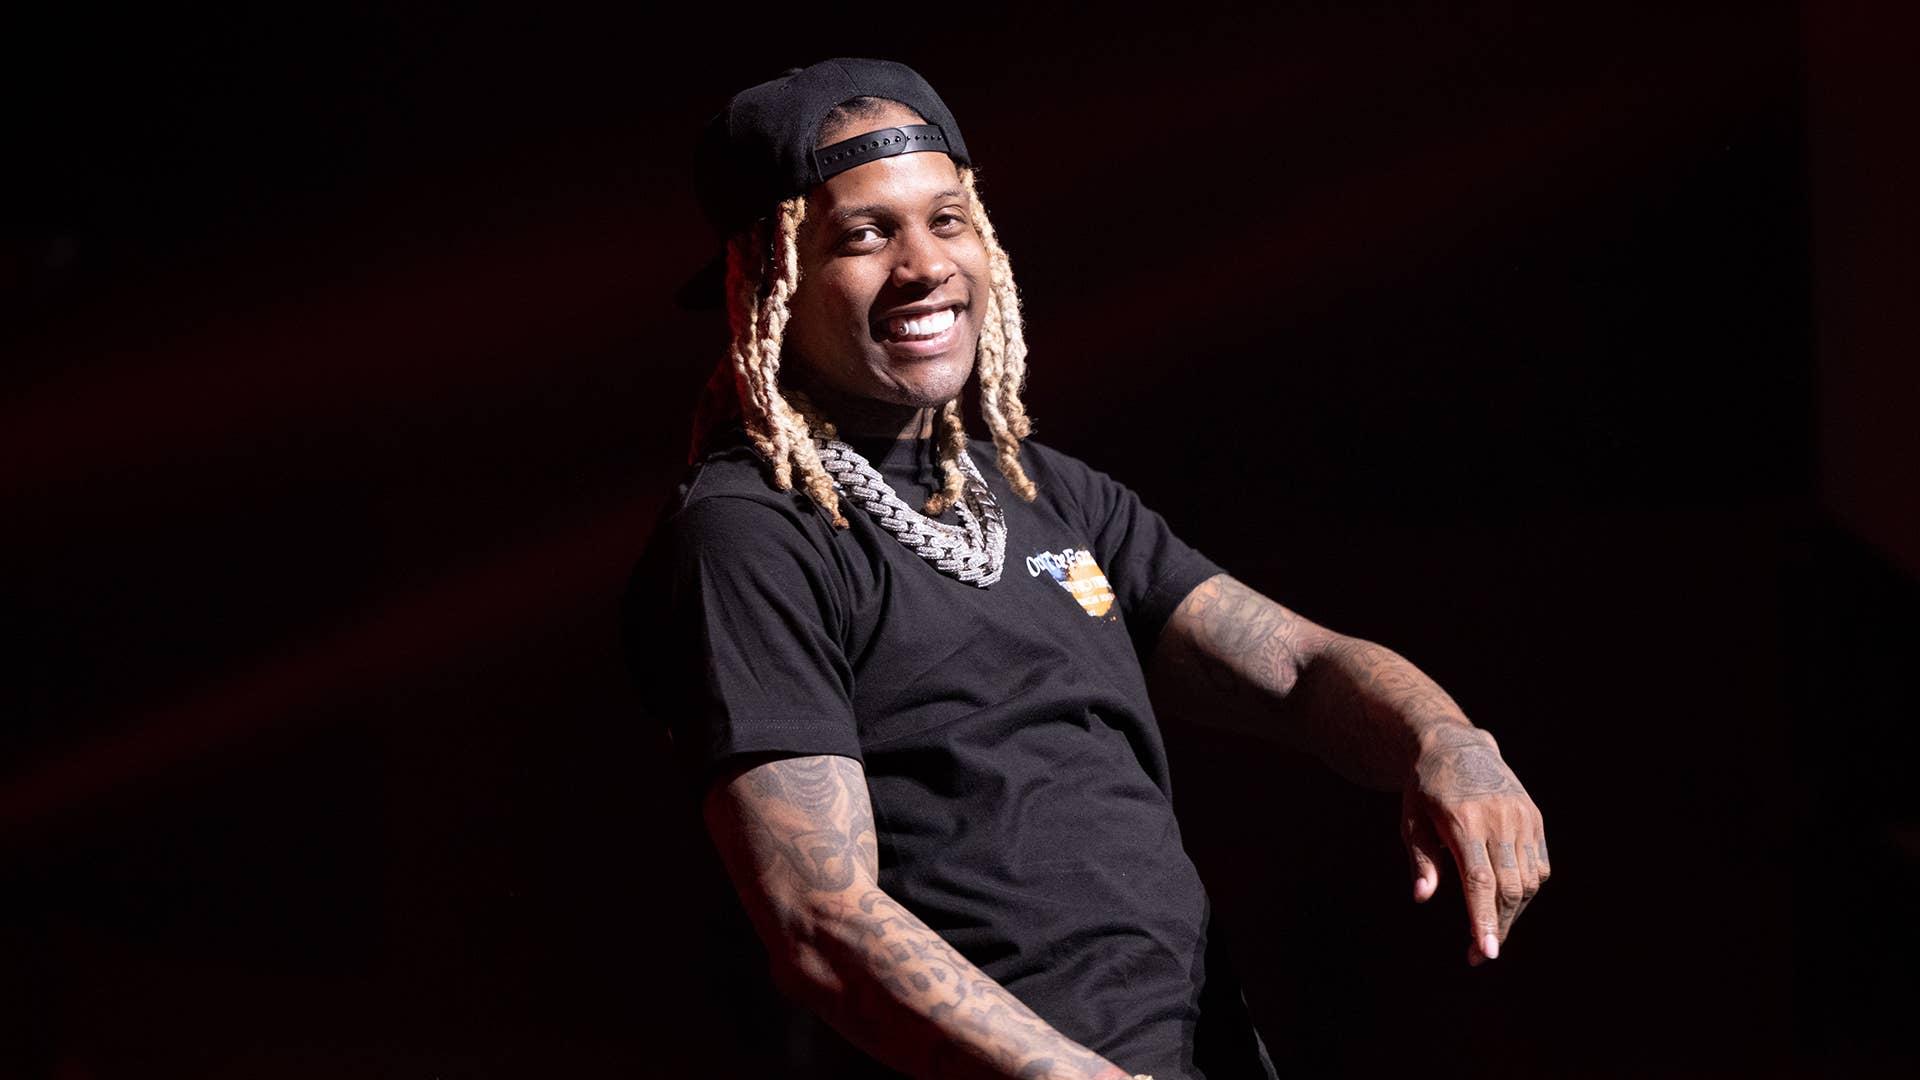 Rapper Lil Durk performs onstage during the '7220' Tour at YouTube Theater